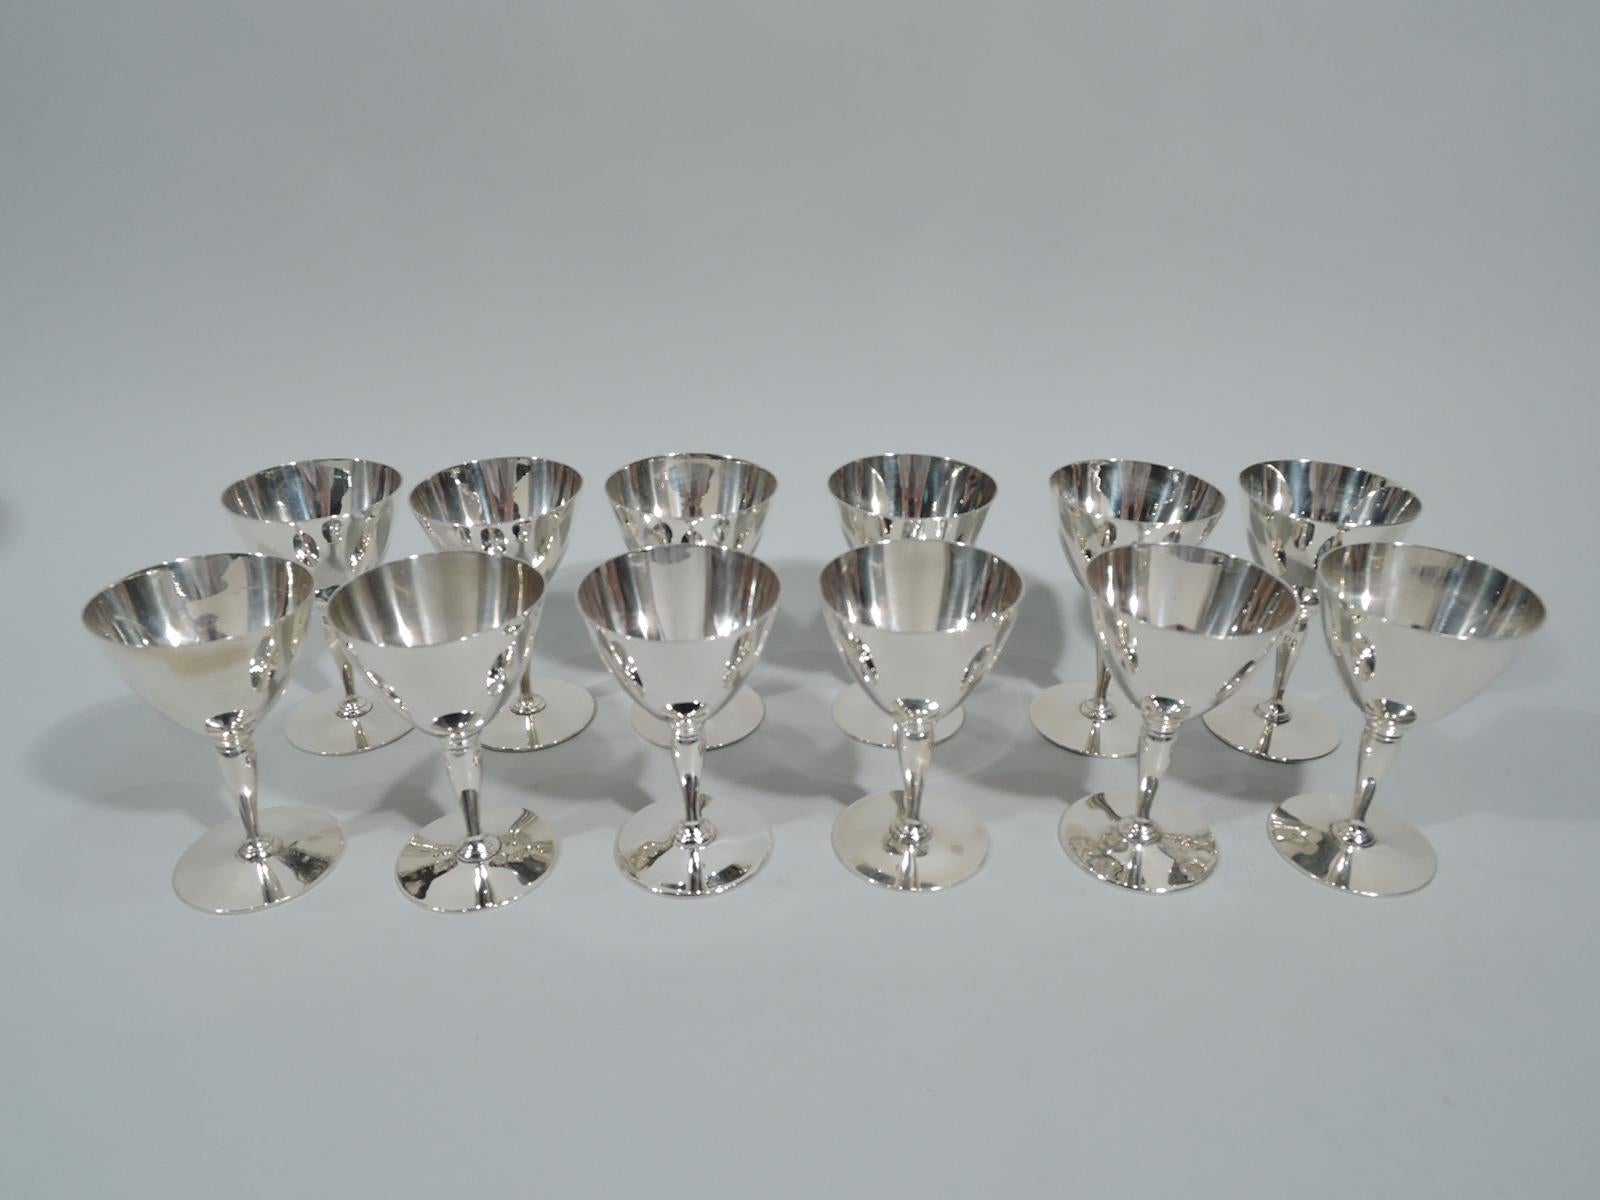 Set of 12 Art Deco sterling silver cocktail cups. Made by Tiffany & Co. in New York, circa 1915. Each: Cone on baluster mounted to circle. Spare and functional. Nice balance for swishing the booze around. Fully marked including pattern no. 18885